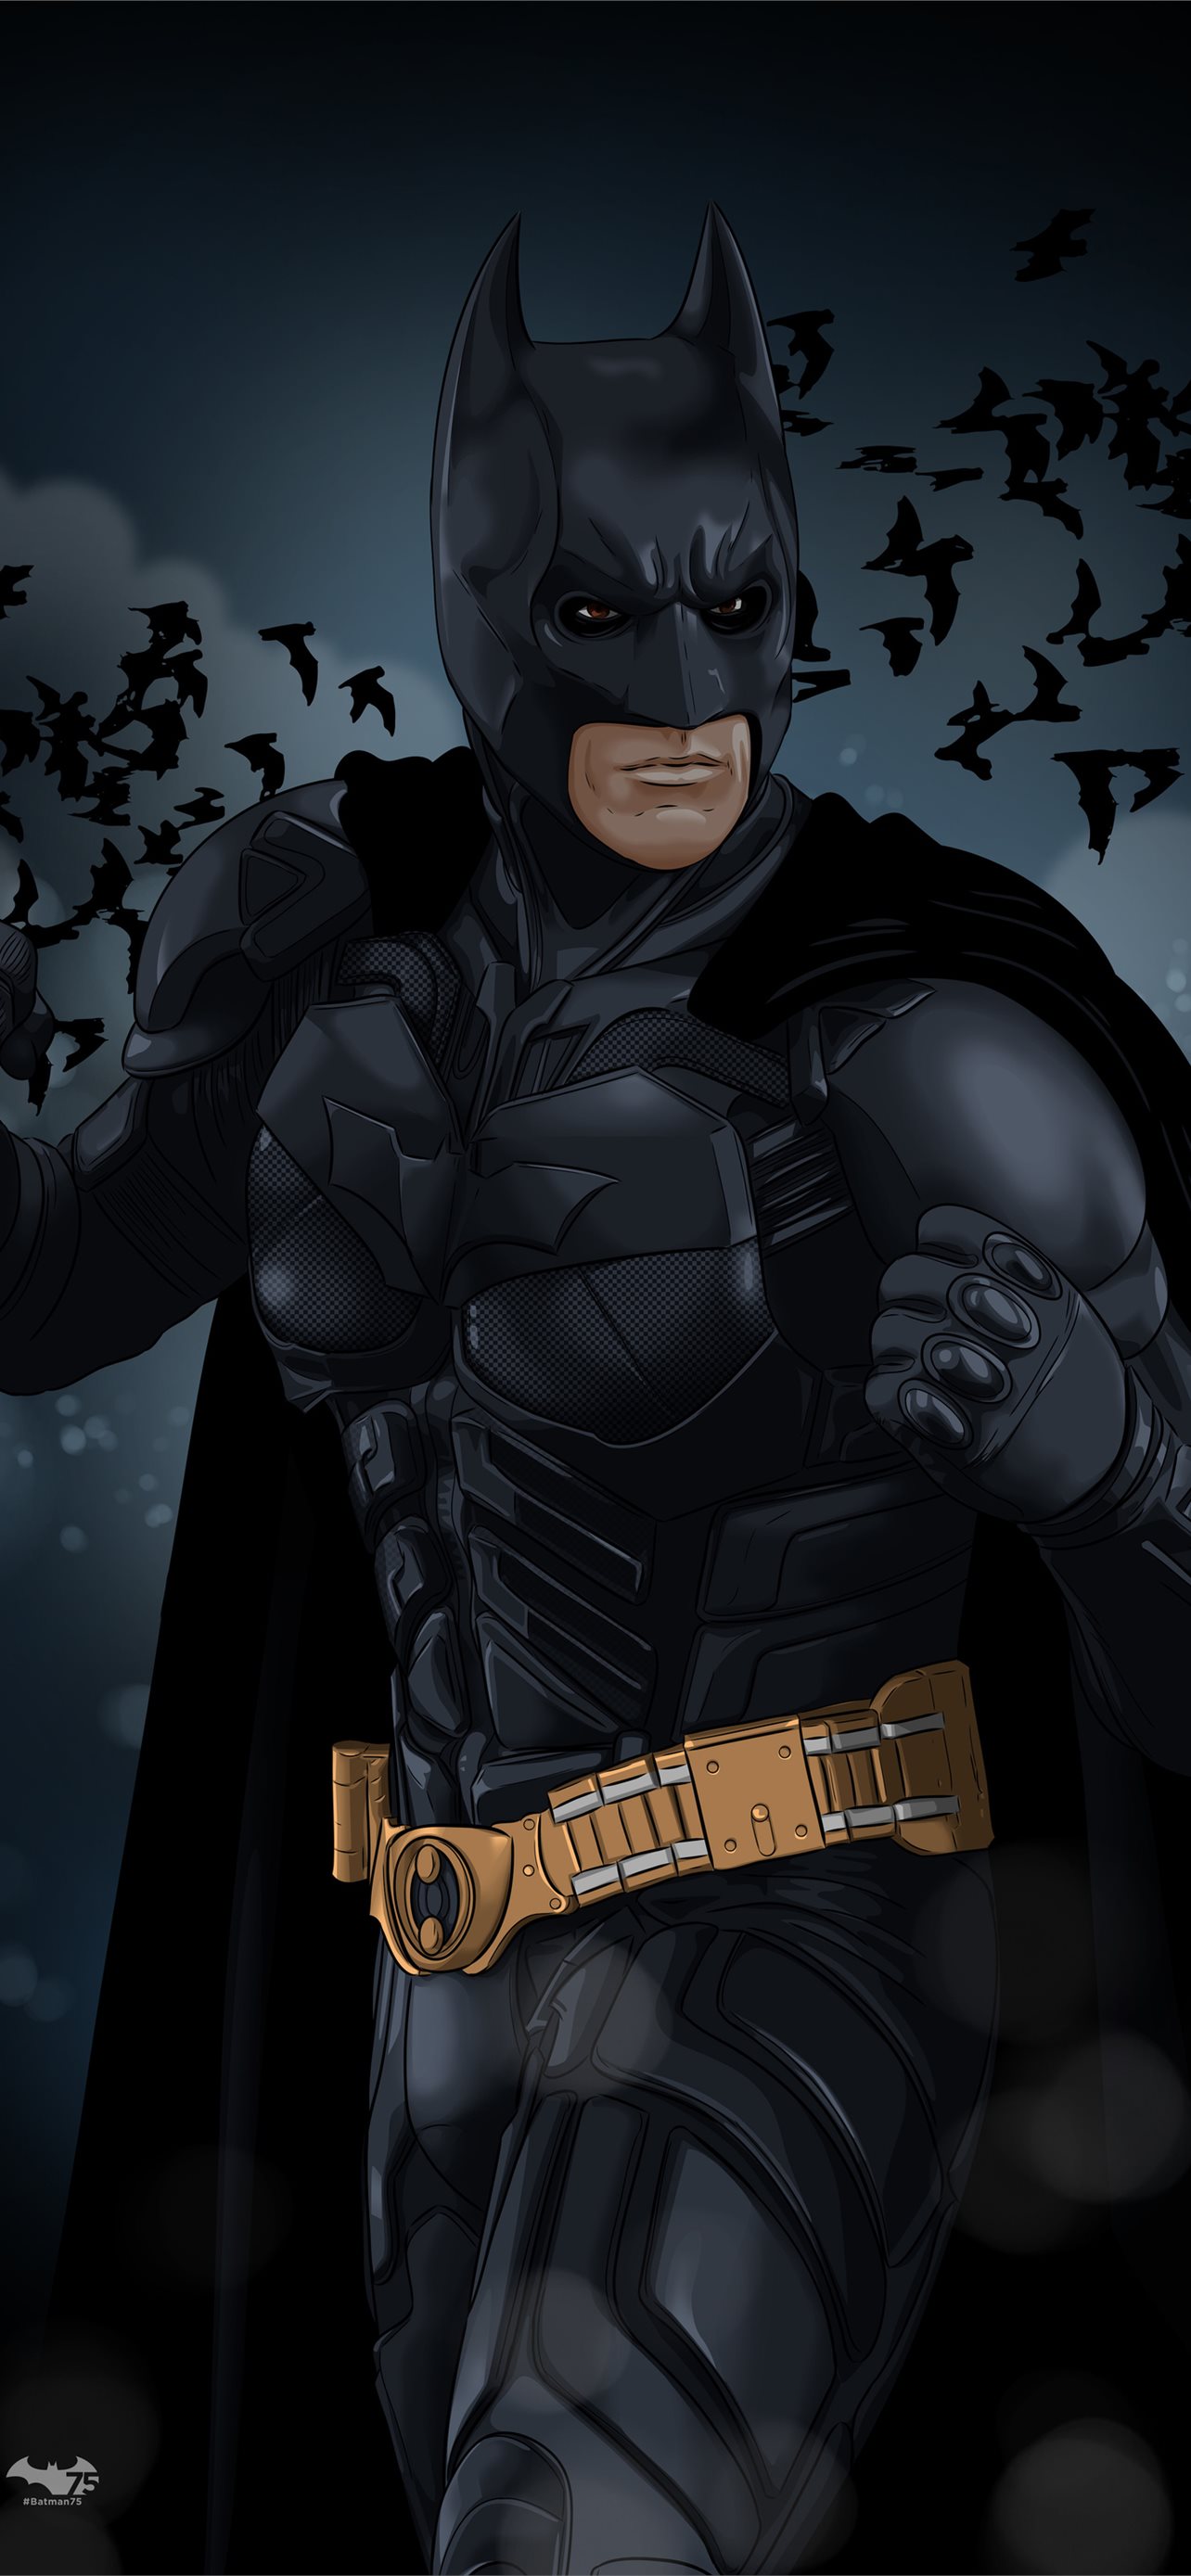 Christian Bale The Dark Knight Samsung Galaxy Note. iPhone Wallpaper Free Download